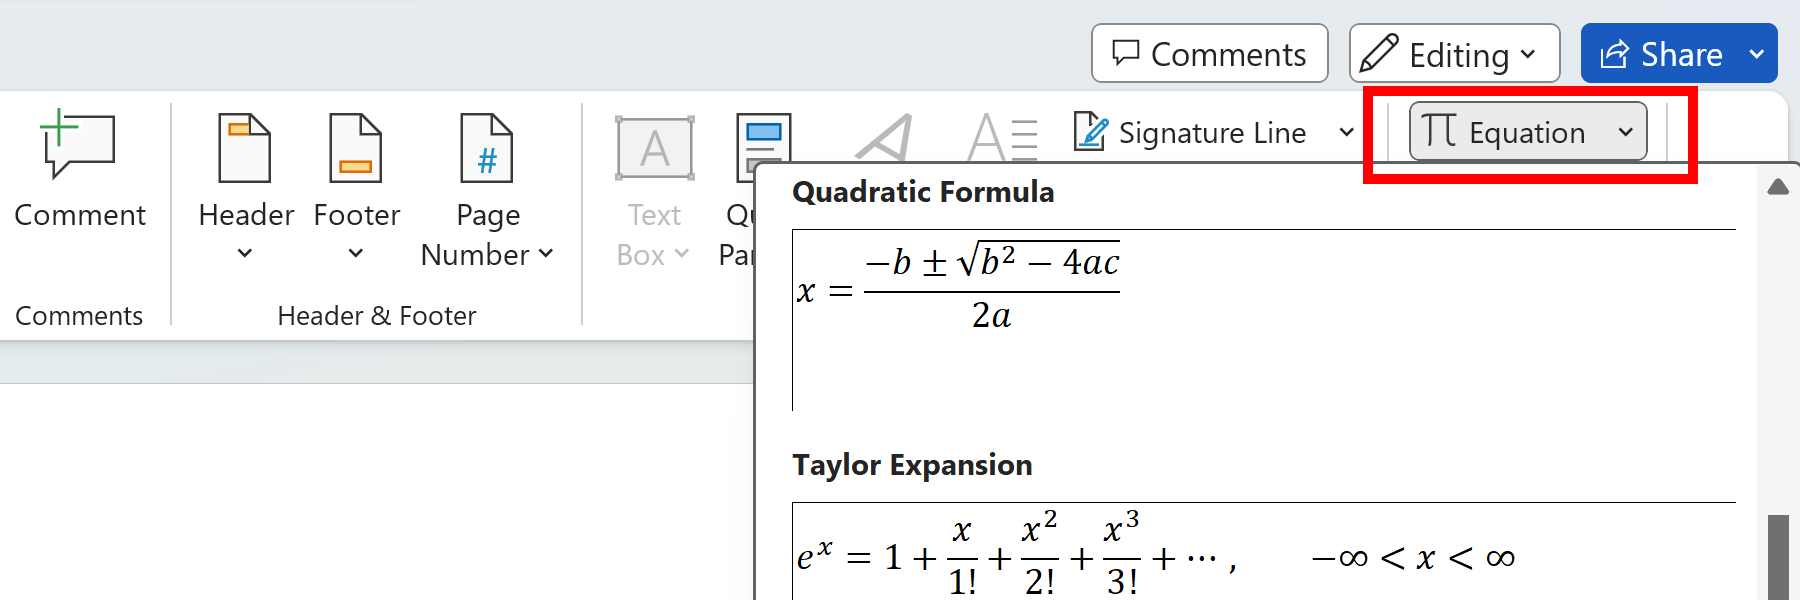 Insert equation into Word document